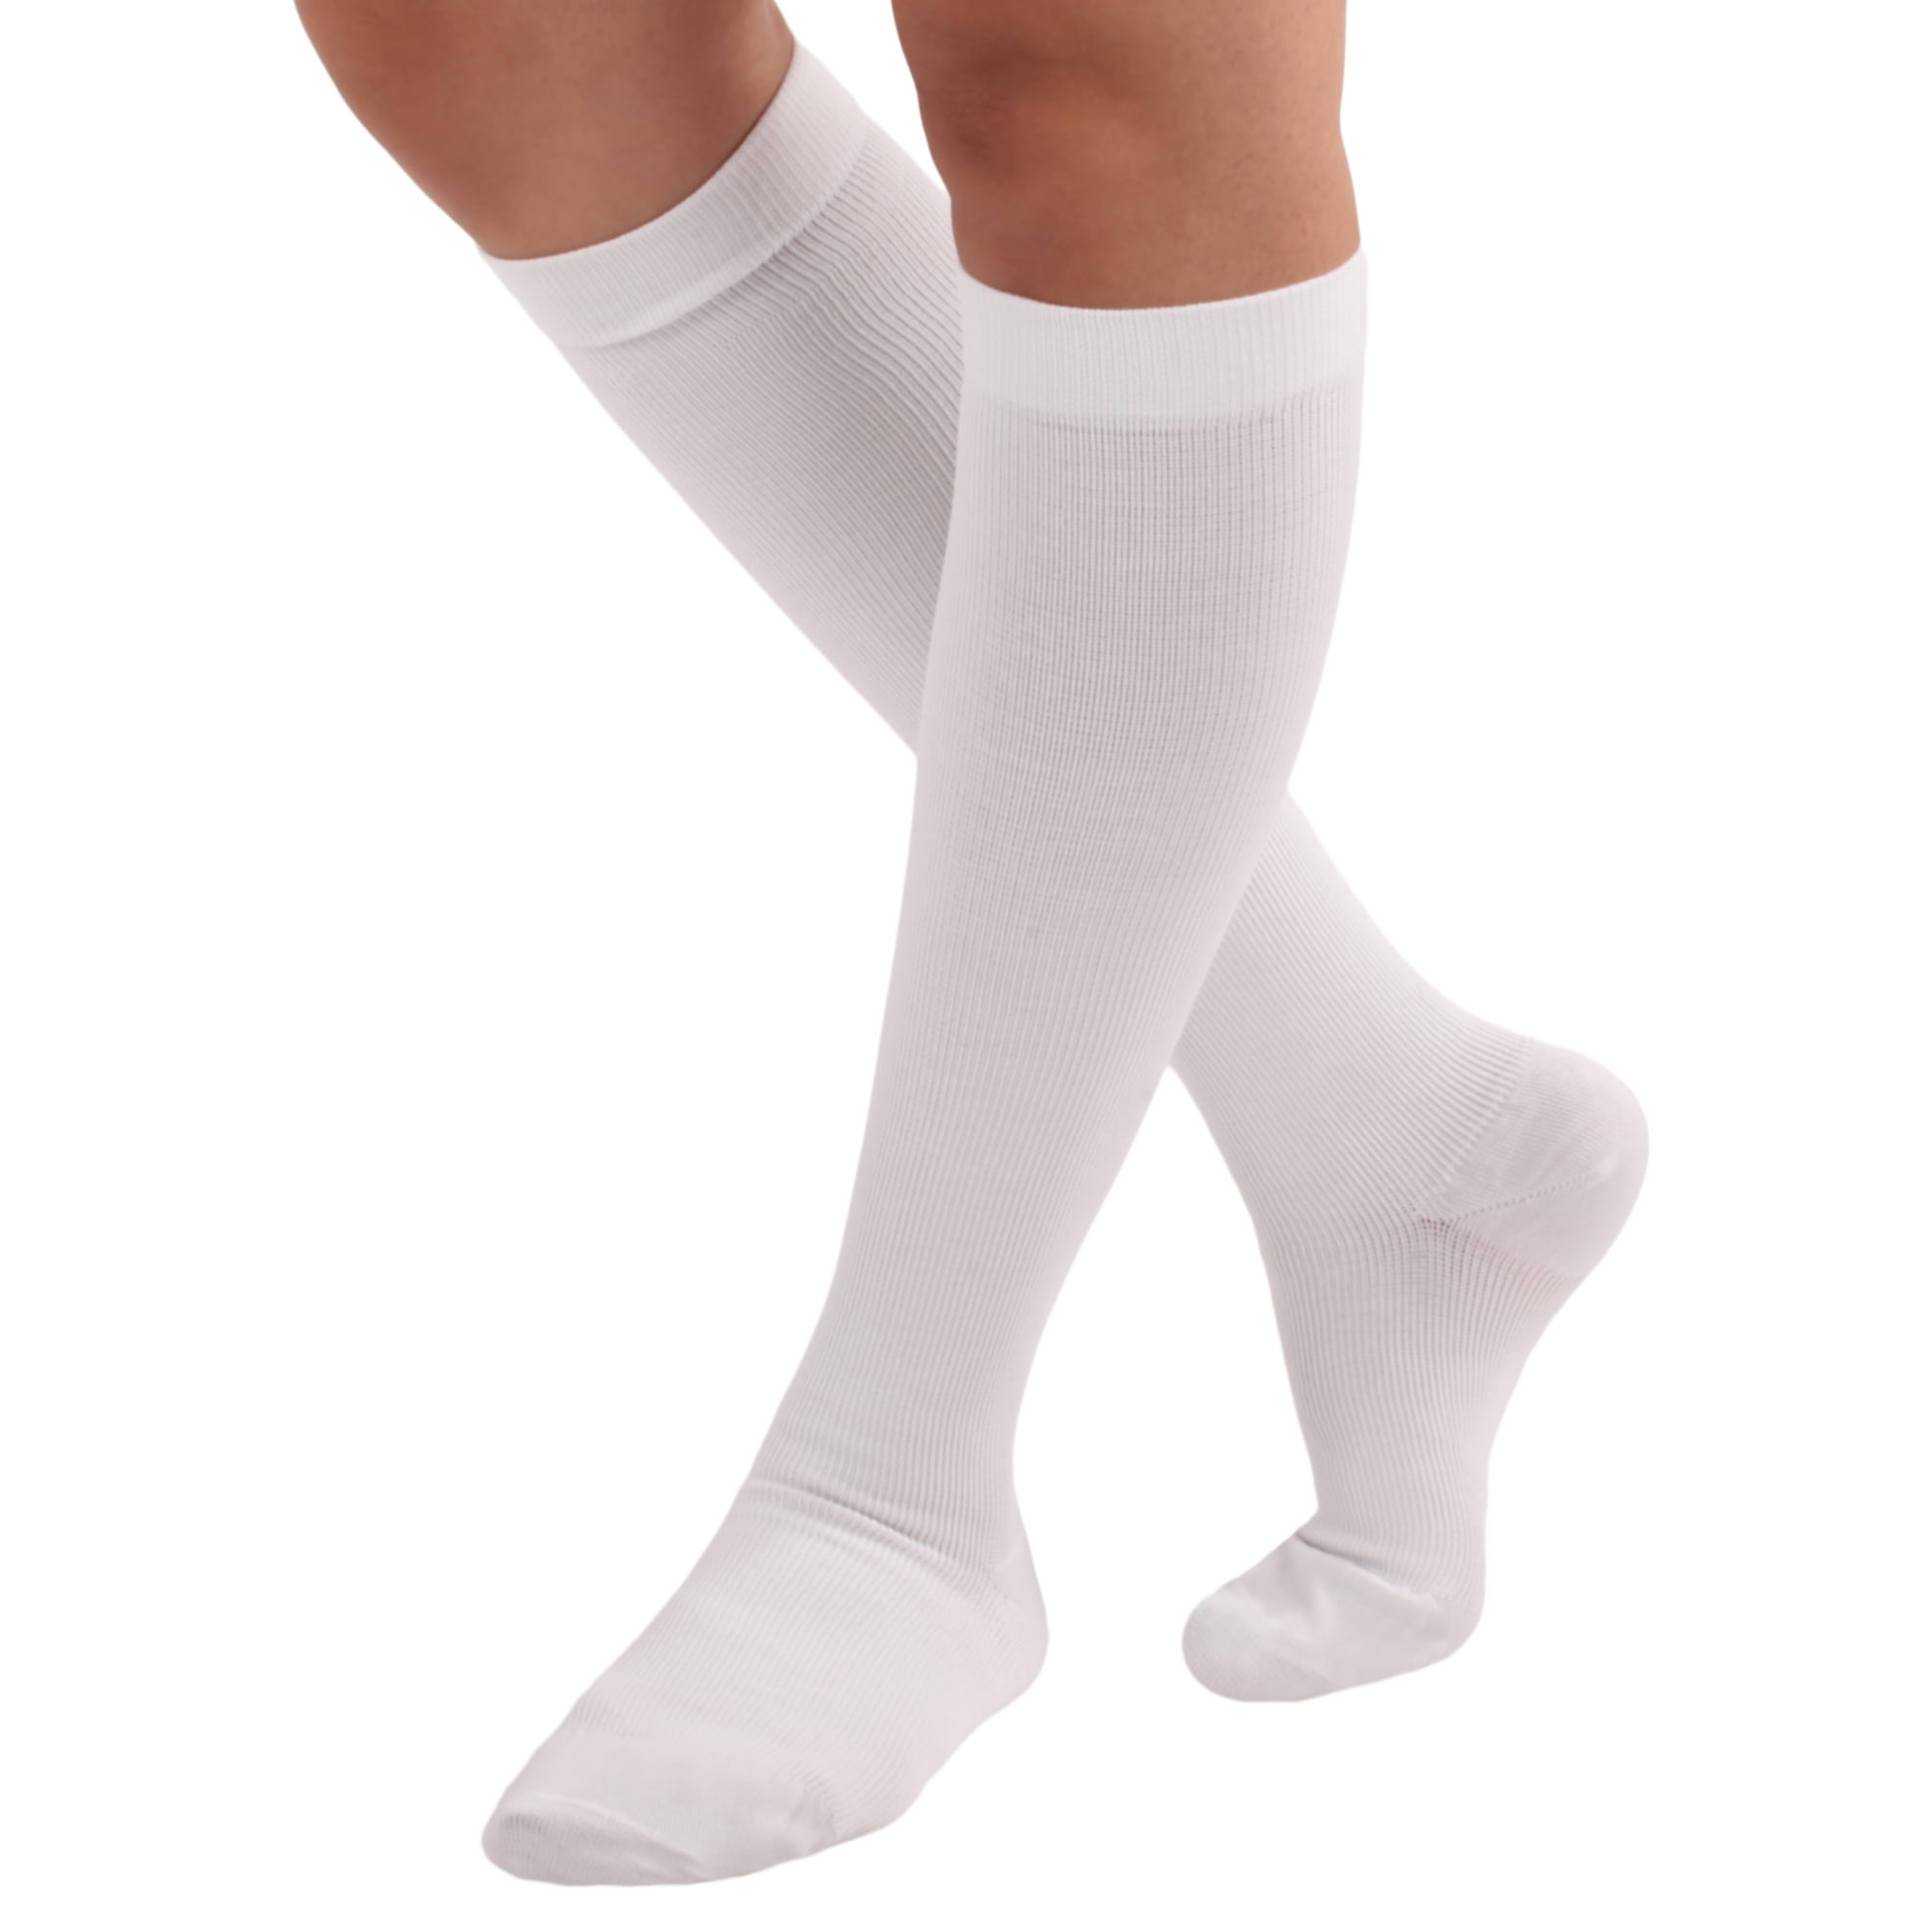 Absolute Support 20-30mmHg Firm Support Unisex Cotton Knee Hi ...